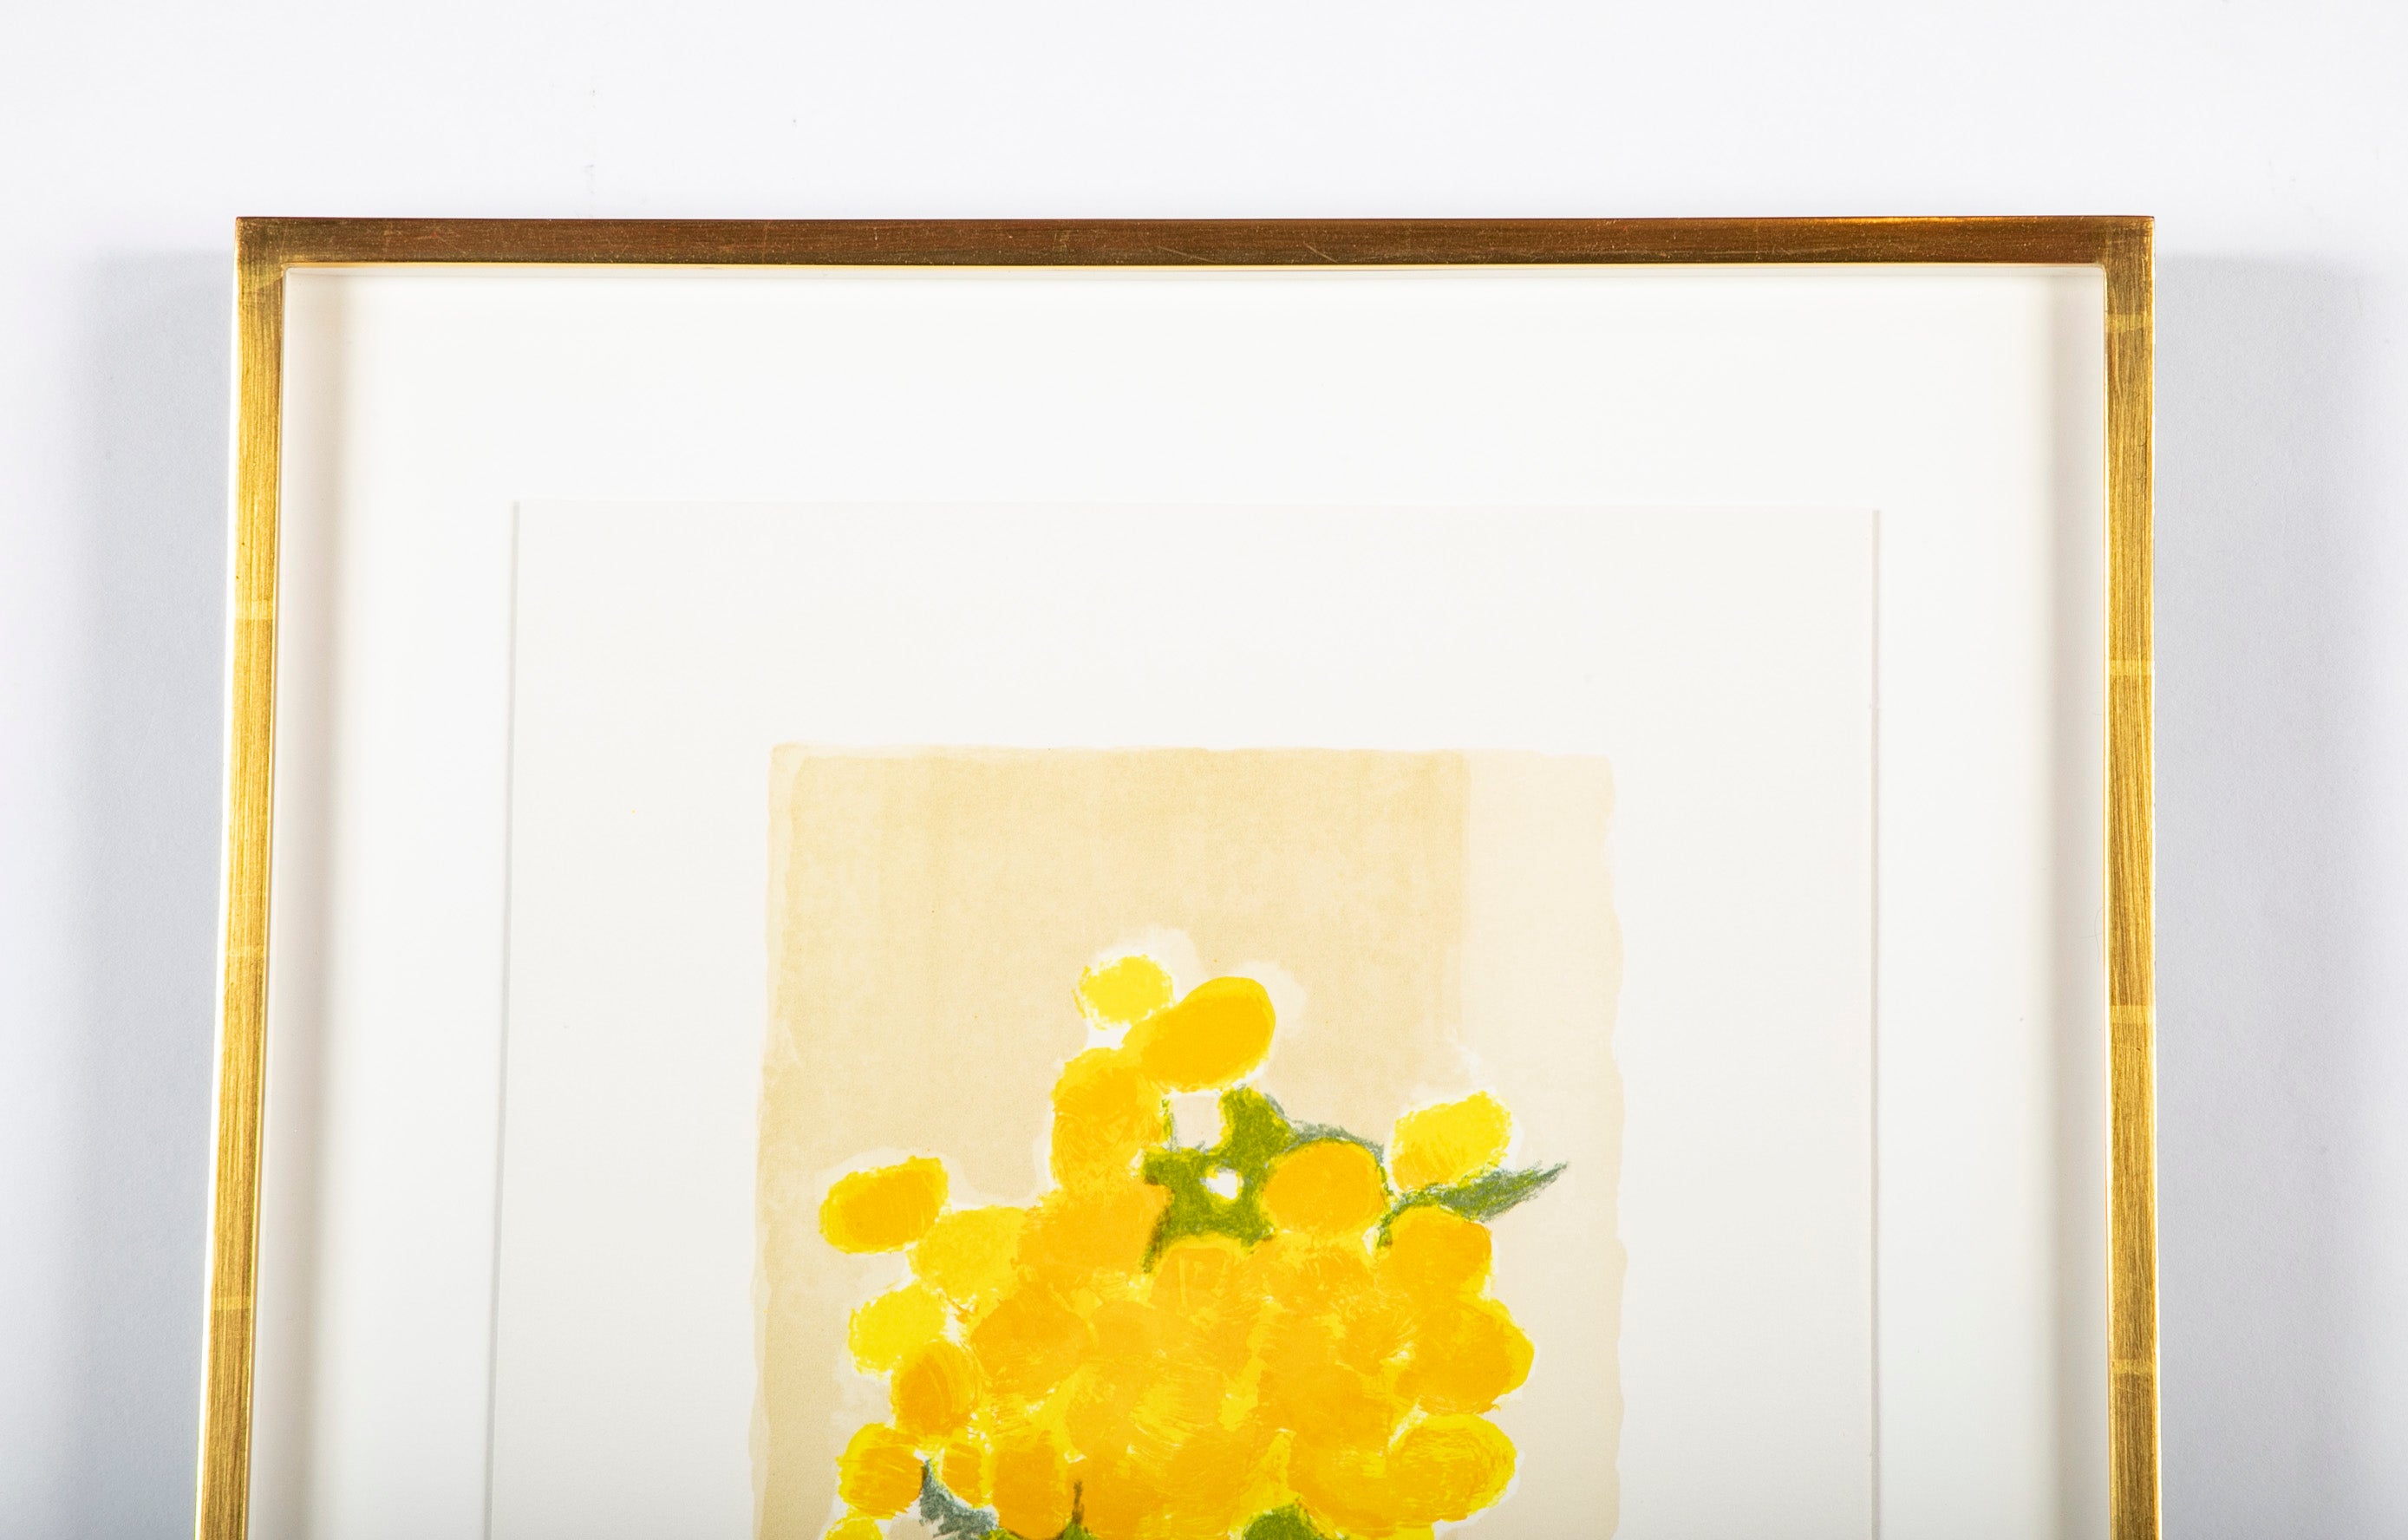 "Bouquet of Yellow Flowers" Signed Lithograph by Bernard Cathelin